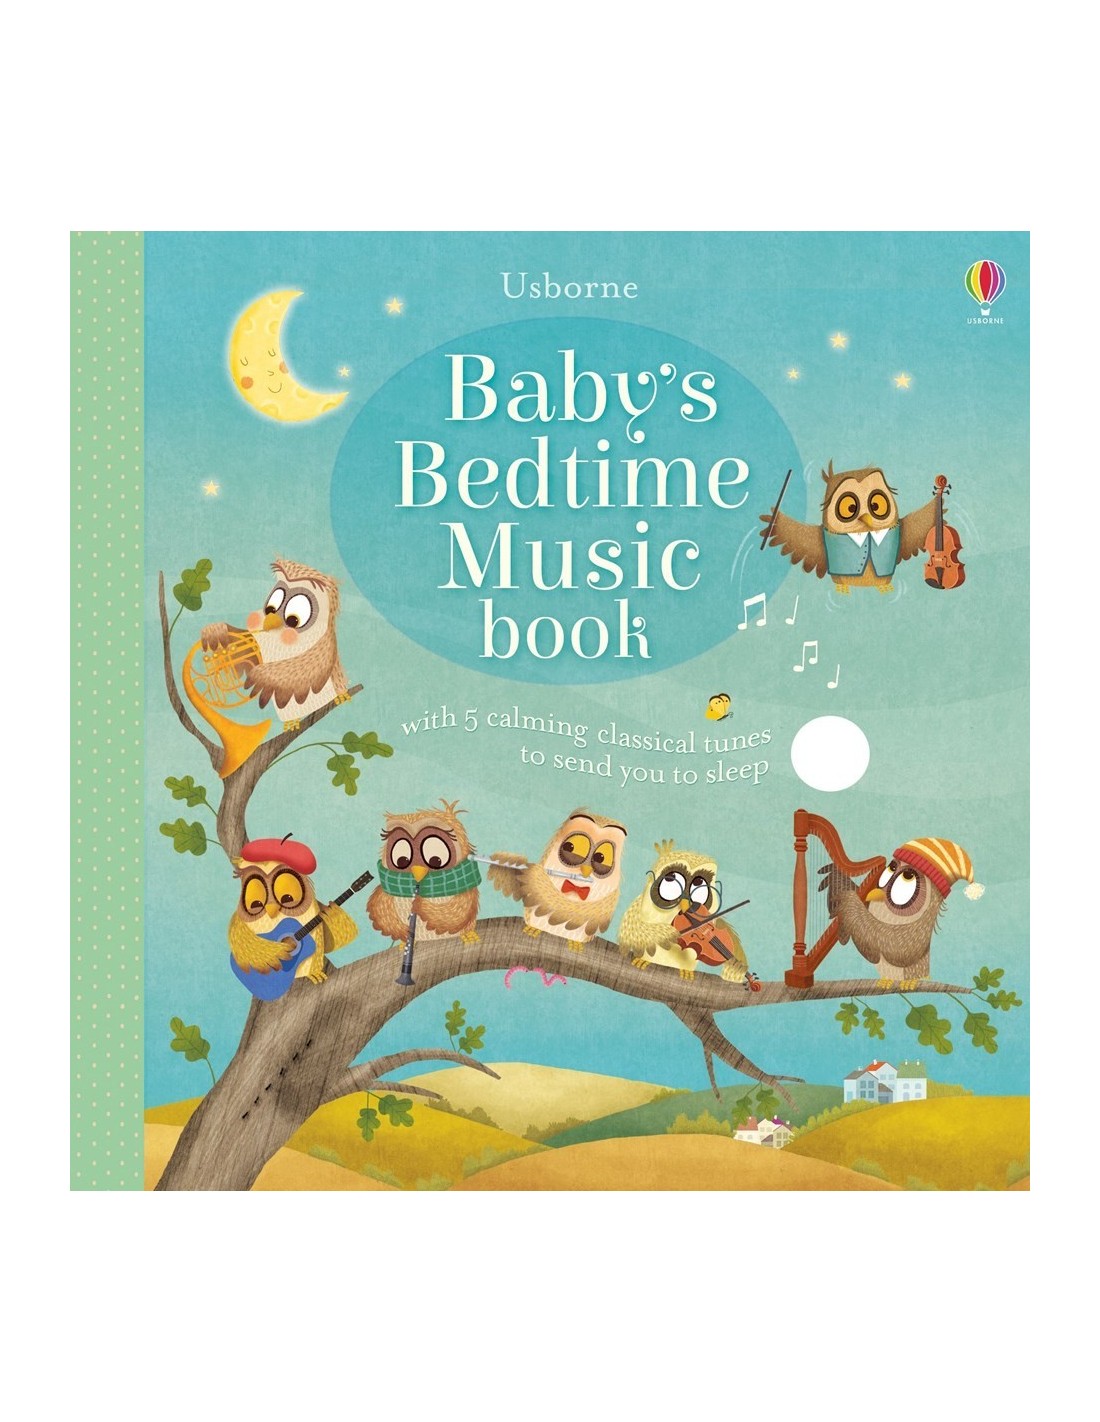 Baby's bedtime music book